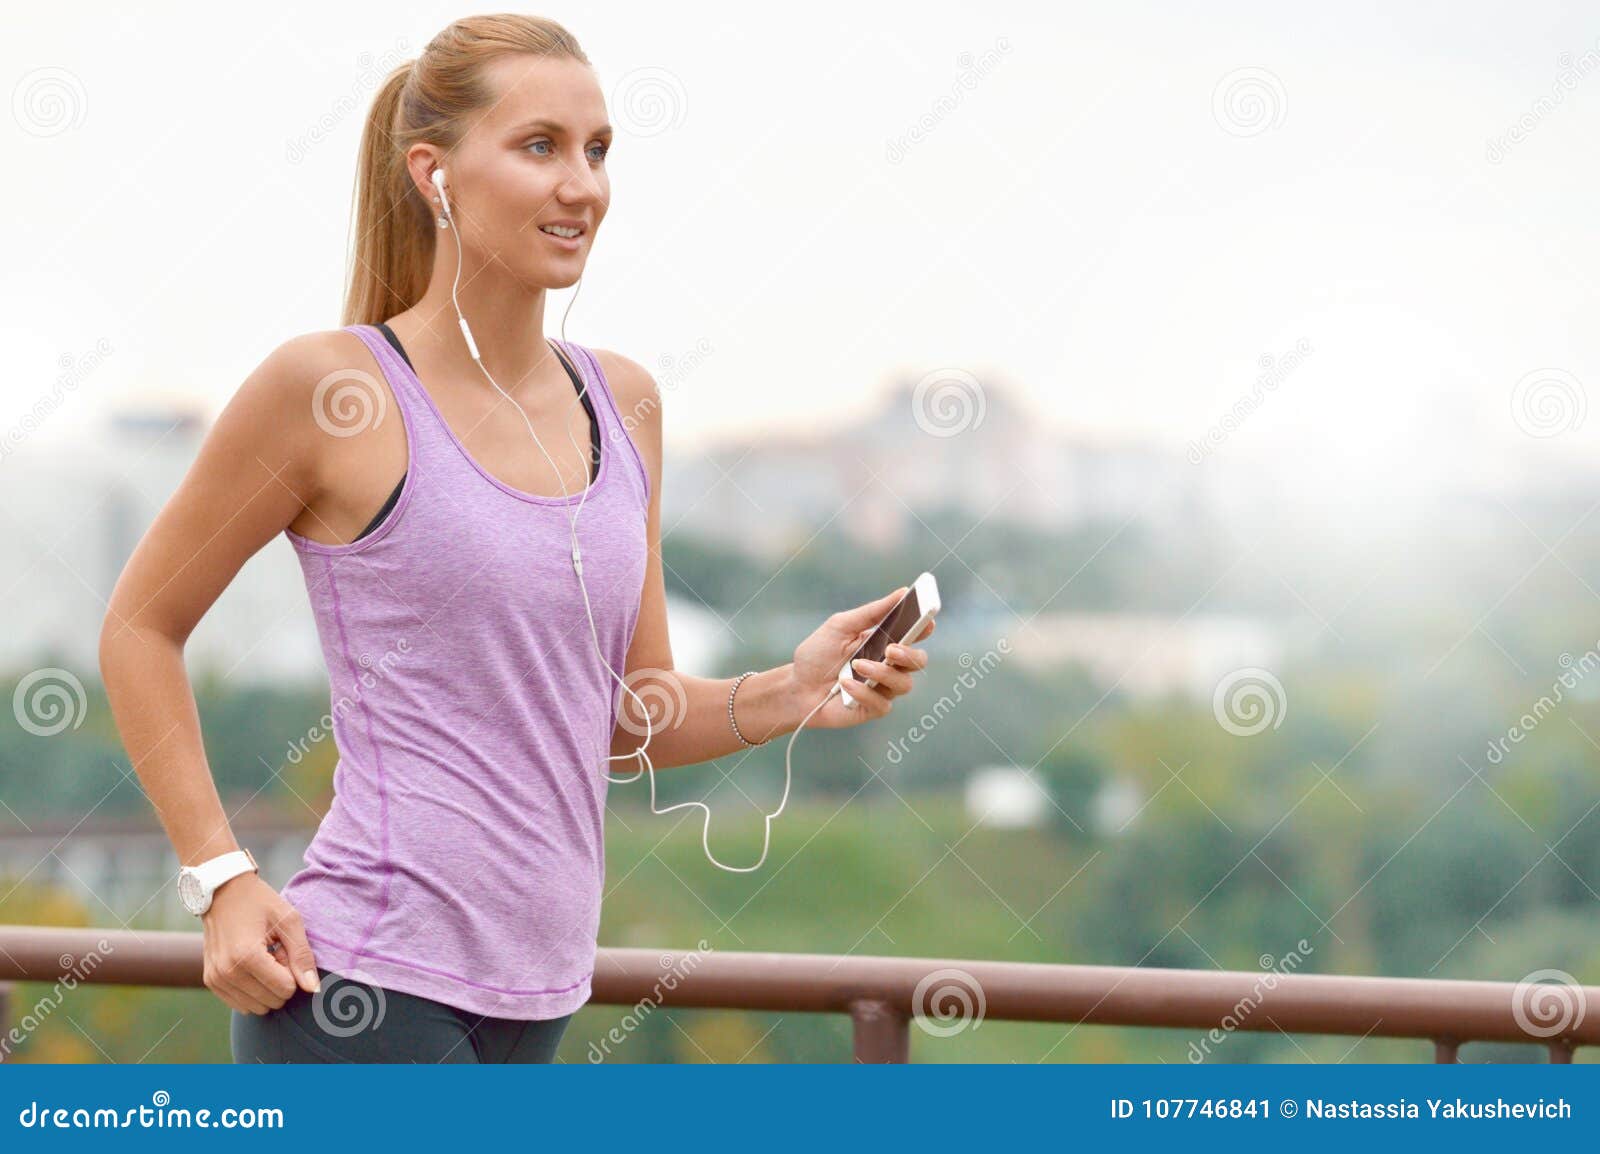 young female joger is runing and listening to music during the run